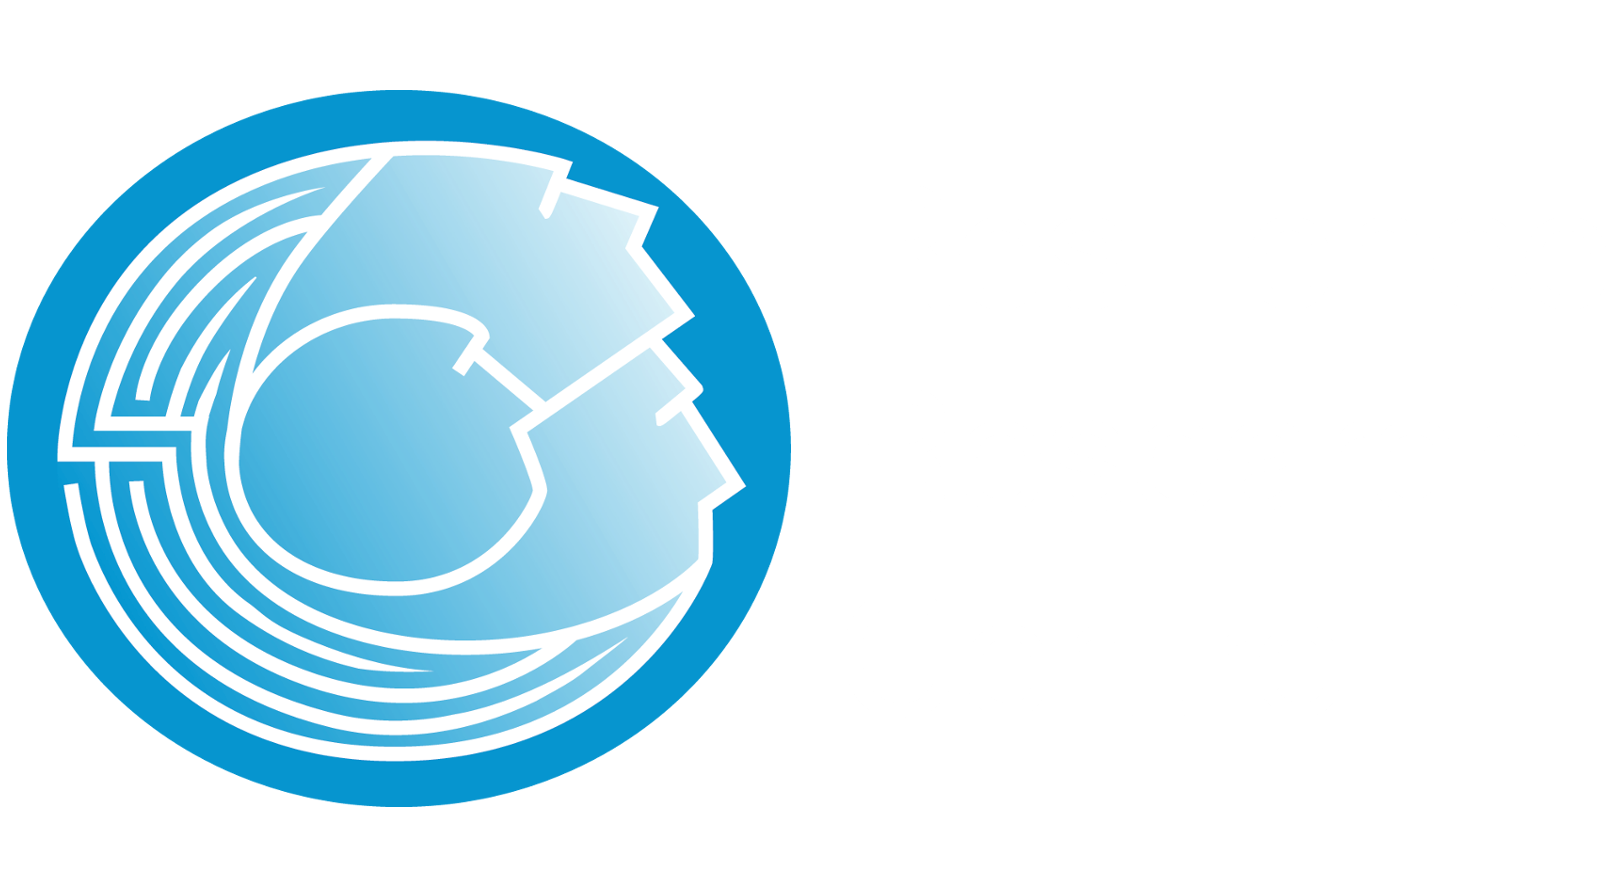 Resilience Research Centre